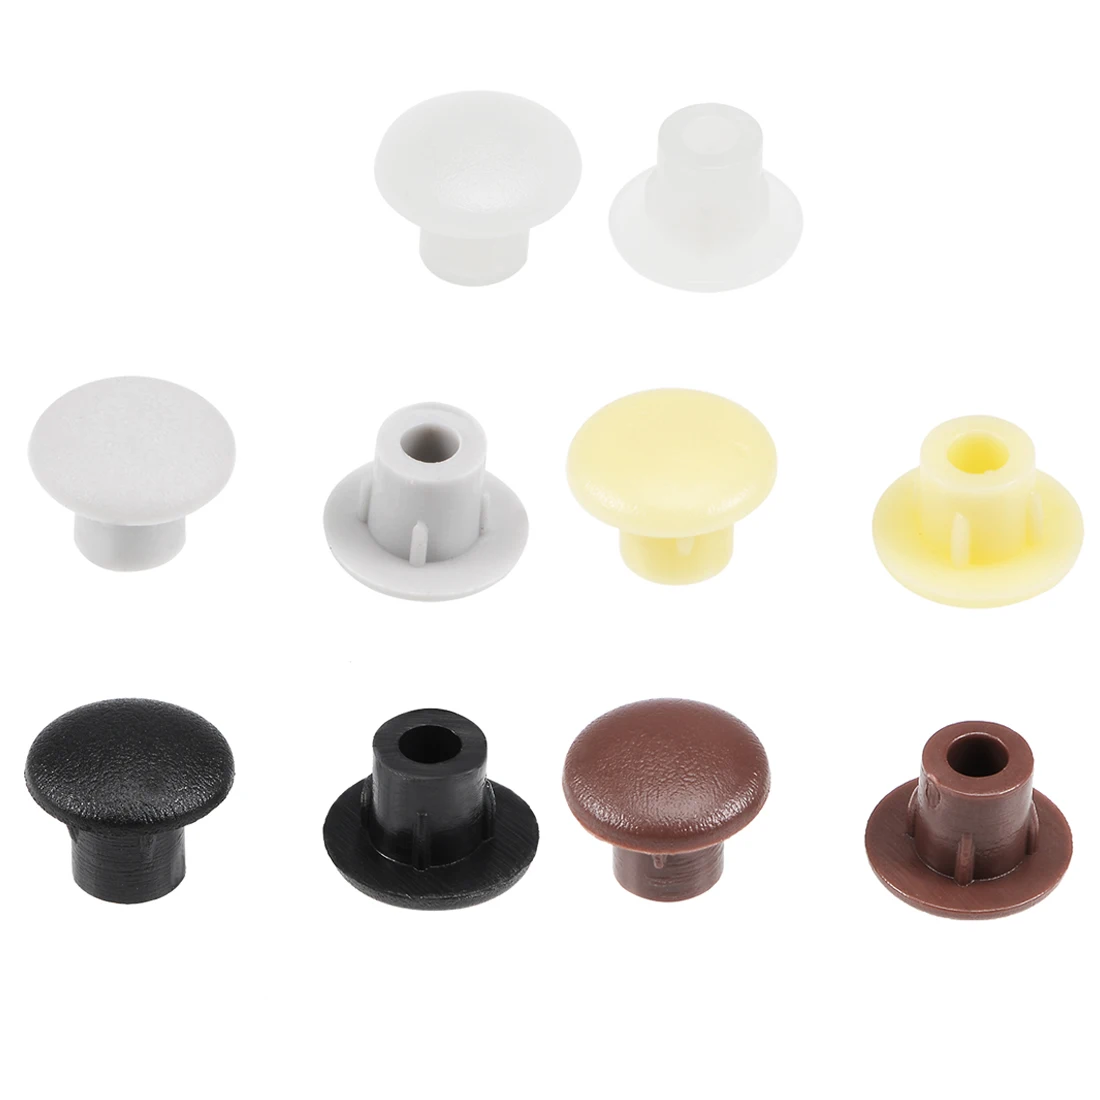 Details about   50Pcs Screw Caps Covers Flush Type Plastic Hole Plugs Buttons Tops for Cupboard 